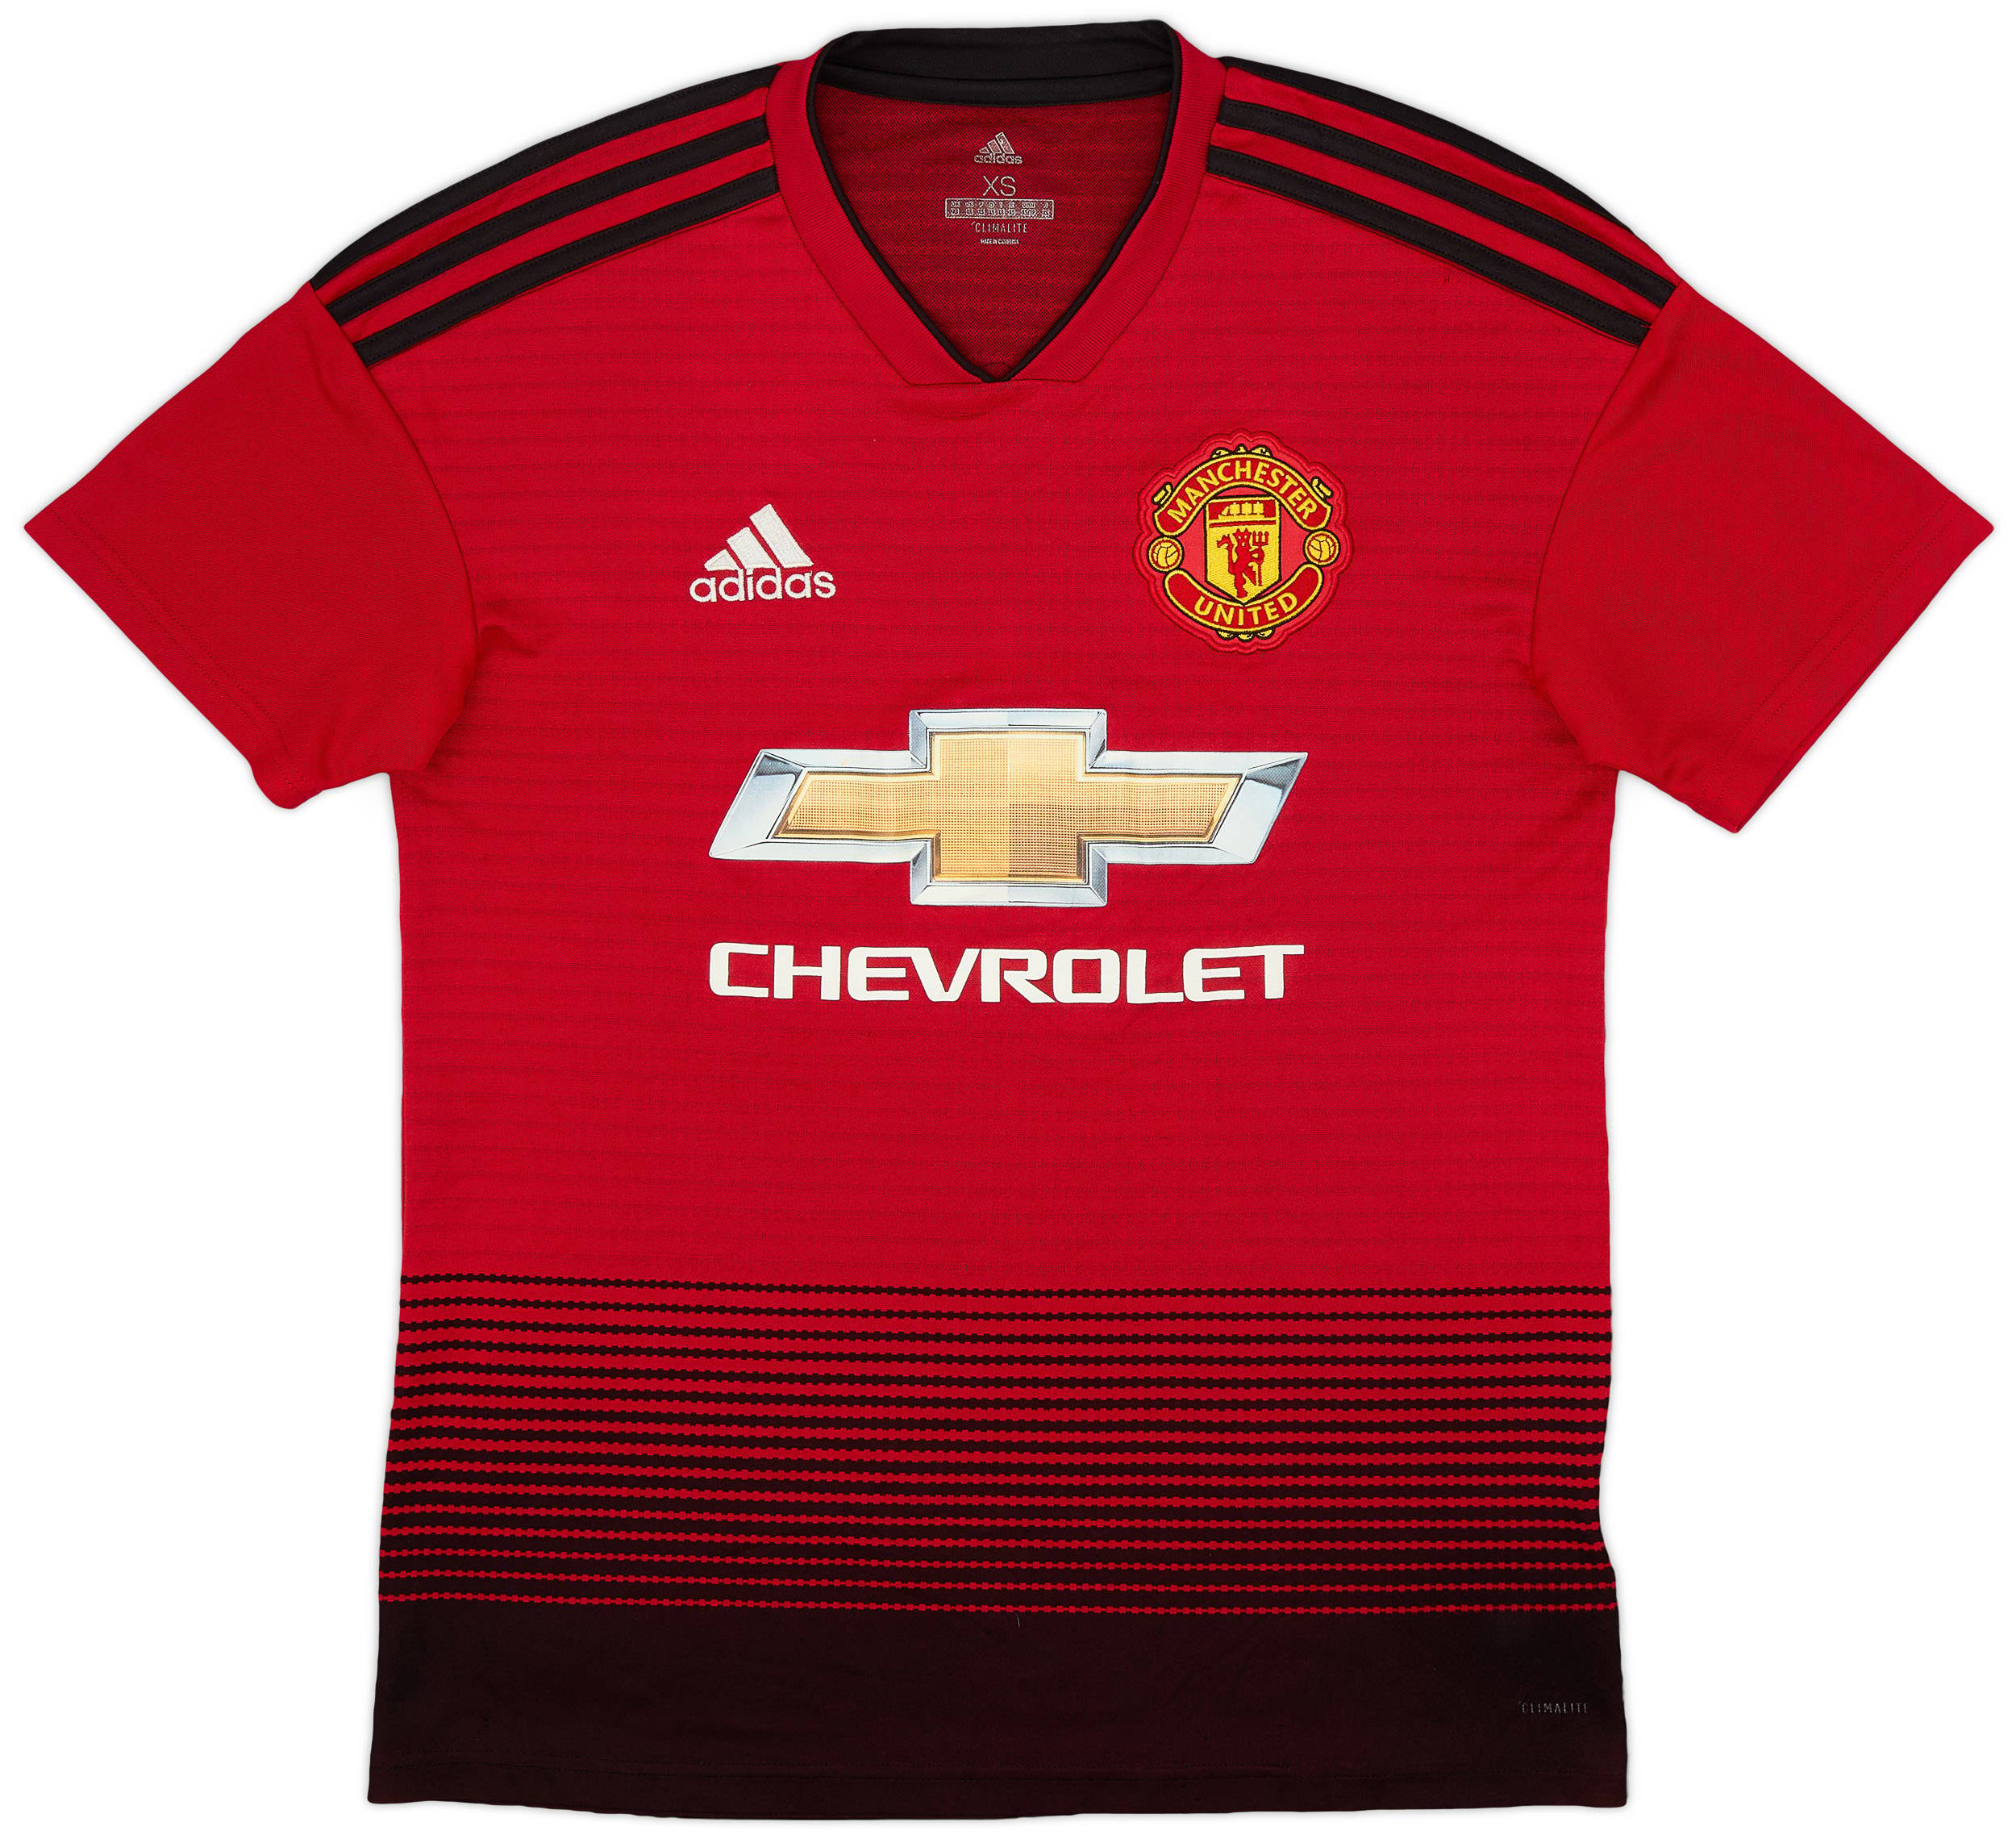 2018-19 Manchester United Home Shirt - 8/10 - (XS)